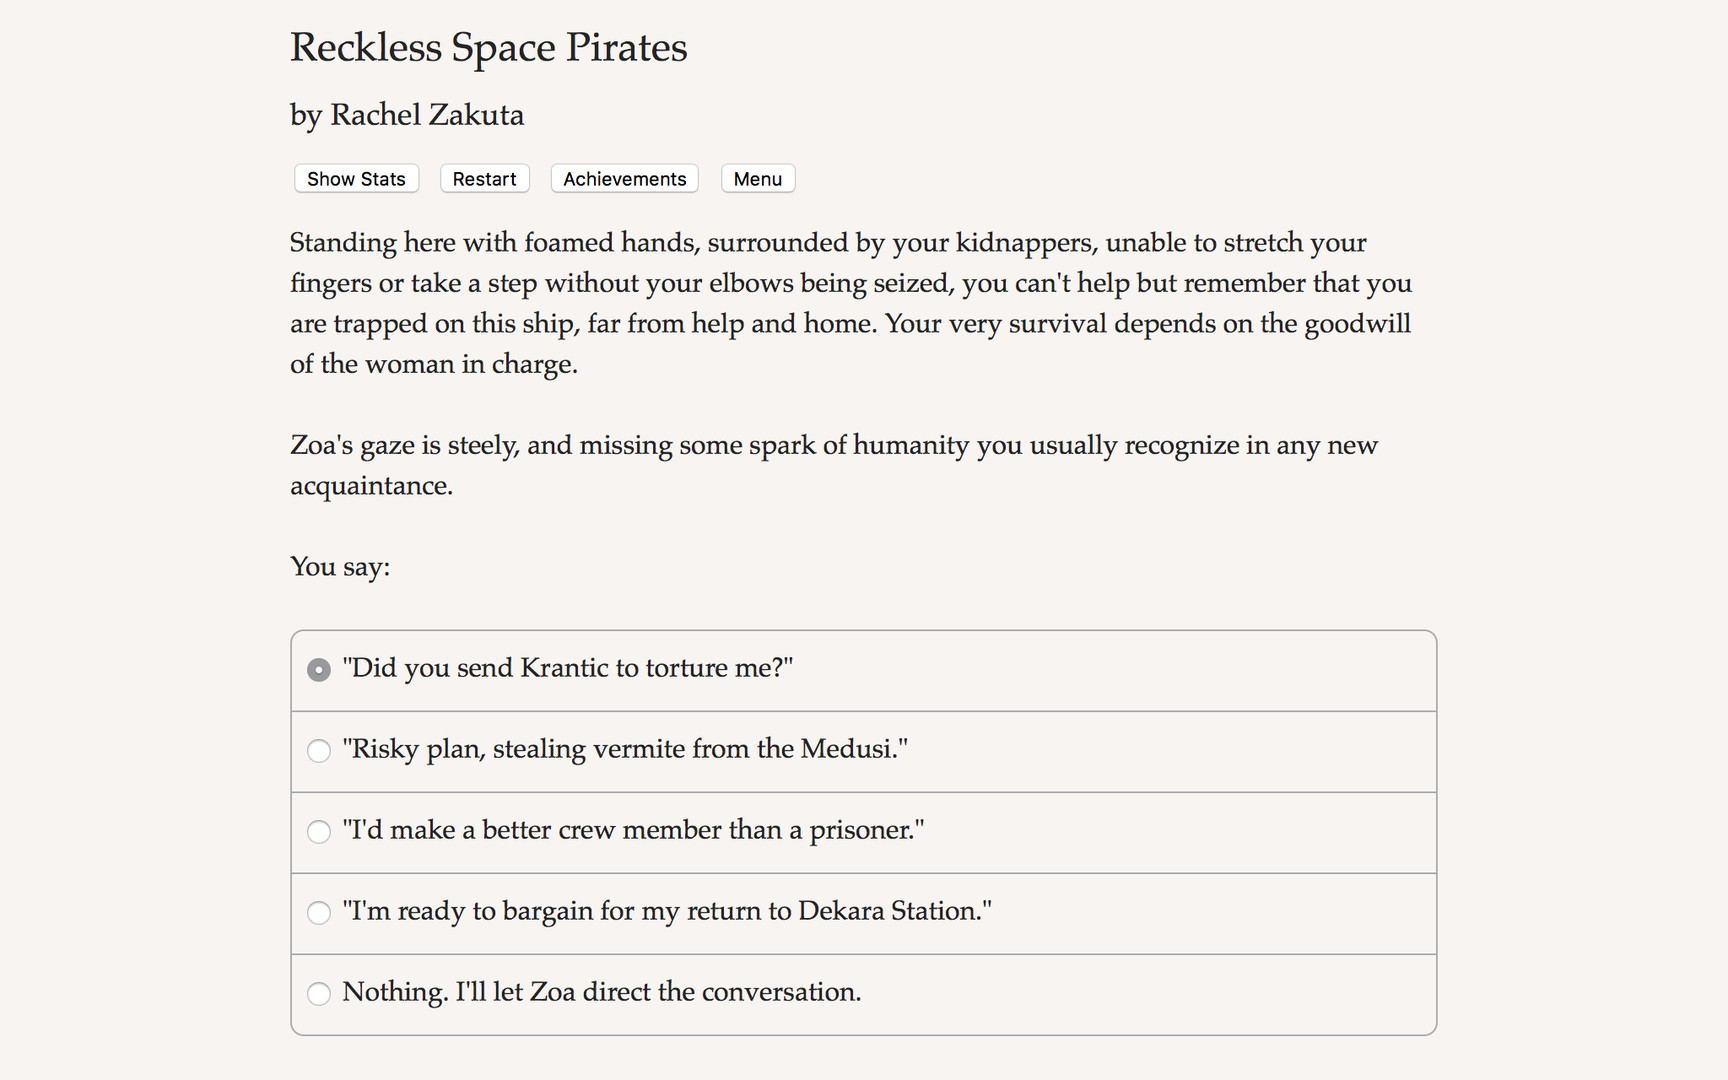 Reckless Space Pirates Featured Screenshot #1